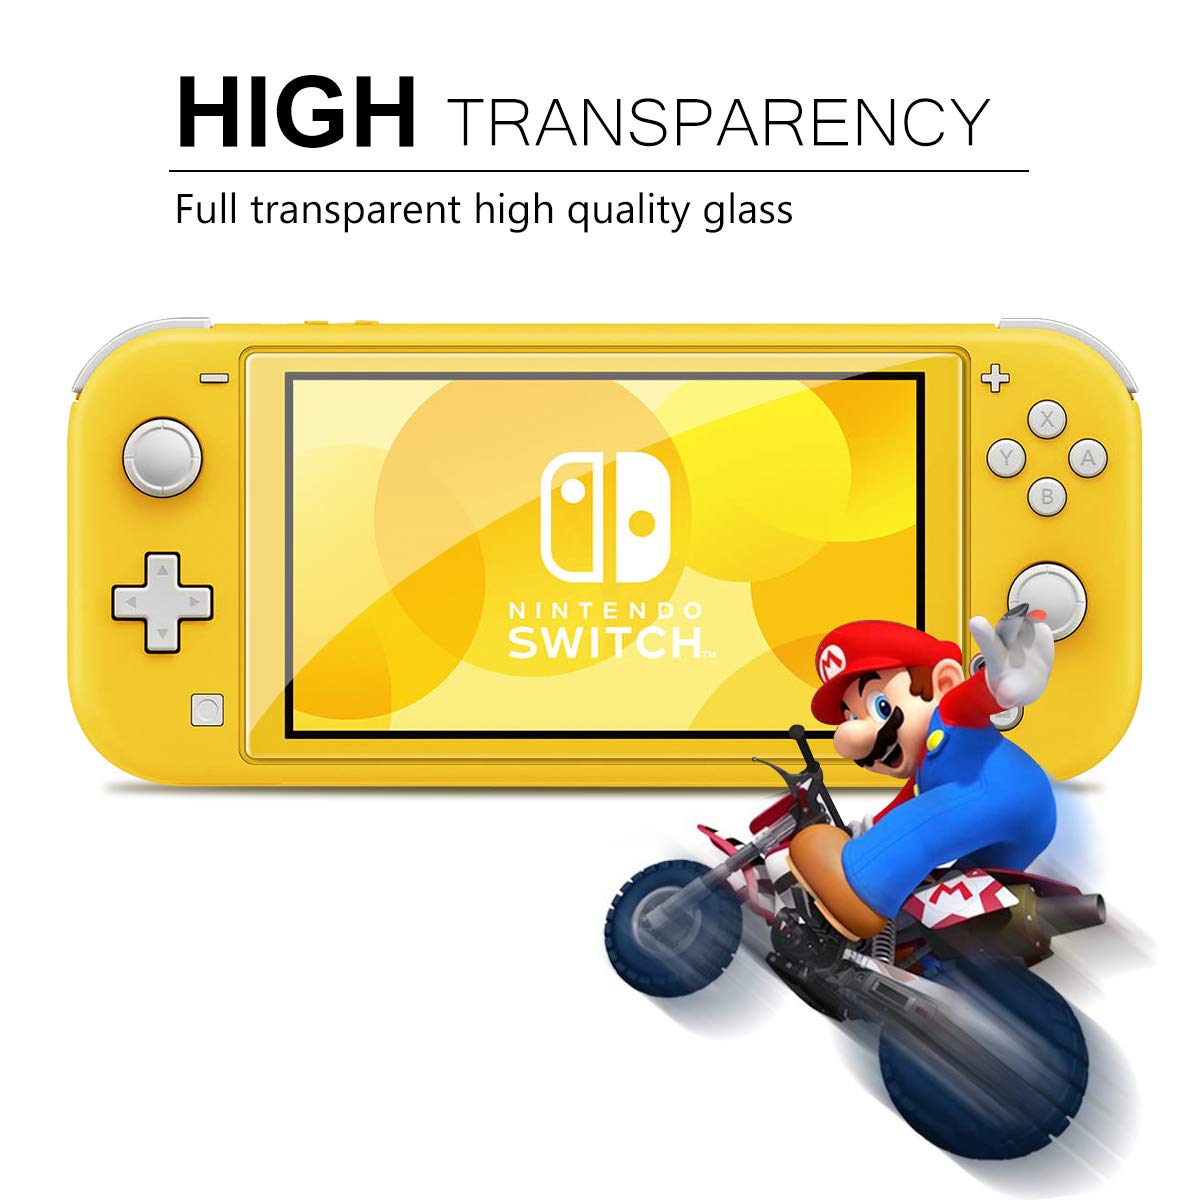 ivoler [3 Pack] Screen Protector Tempered Glass for Nintendo Switch Lite, Transparent HD,High Definition,Clear Anti-Scratch with Anti-Fingerprint Bubble-Free Fit Switch Lite 2019